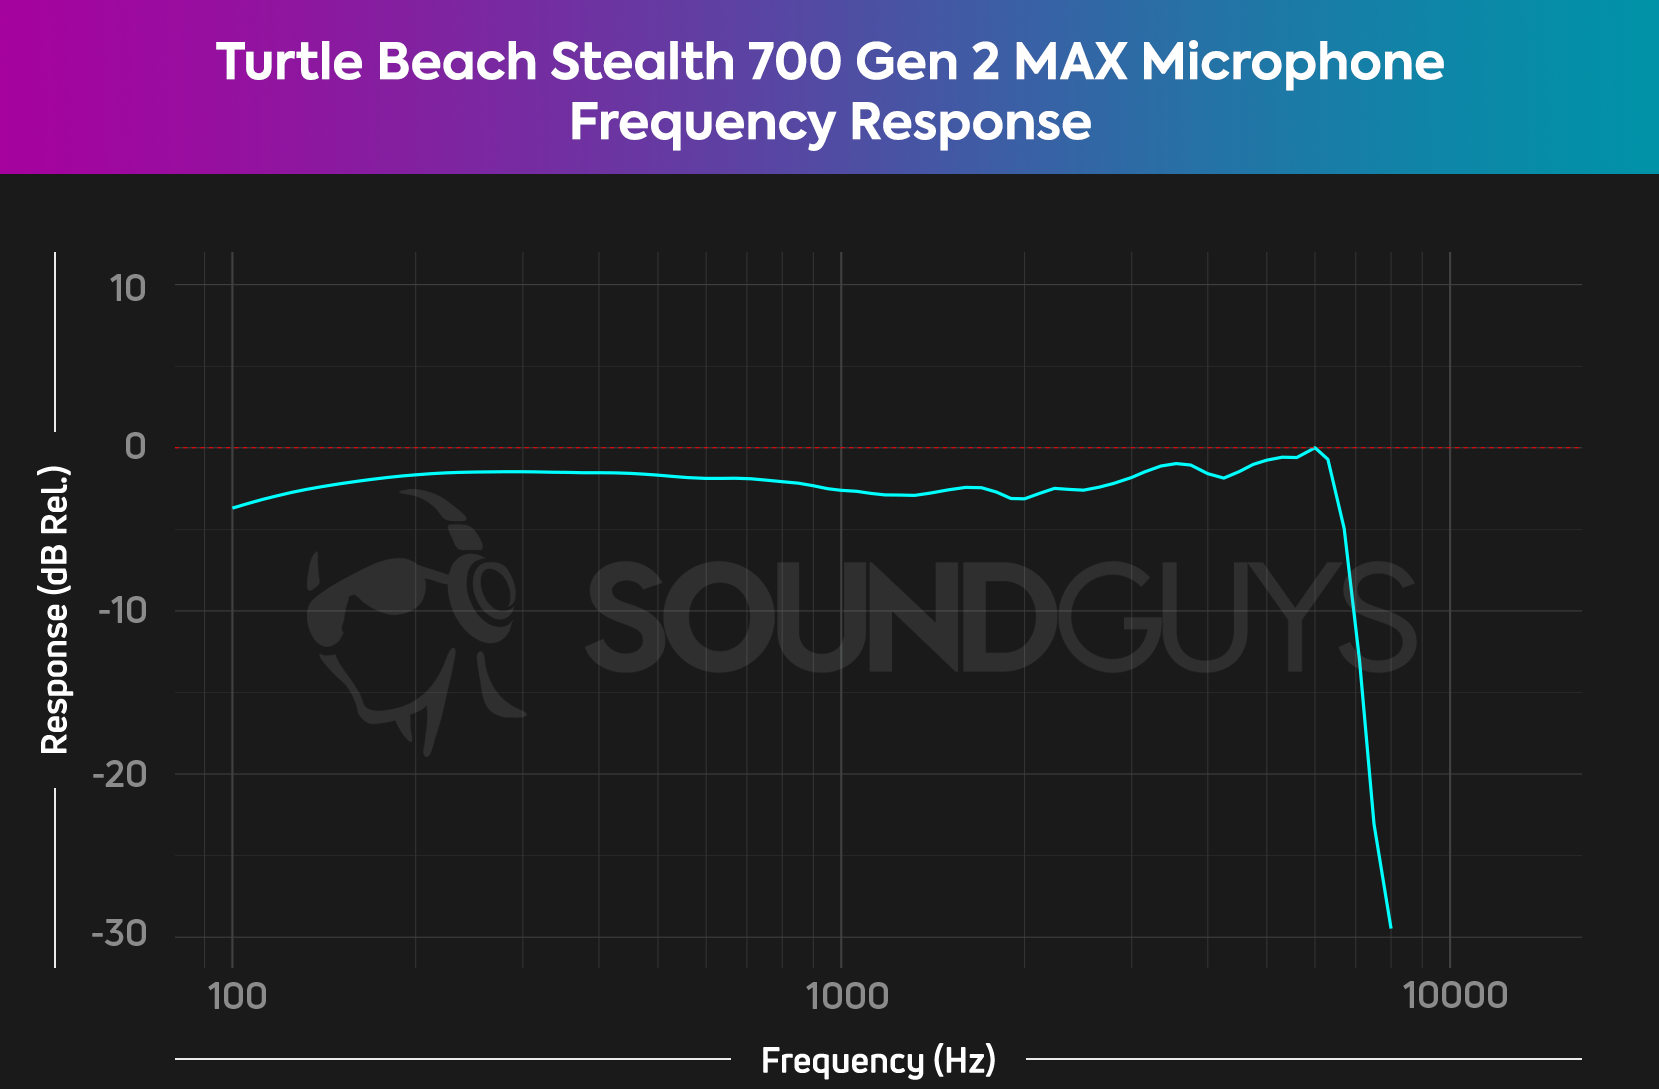 The microphone frequency response chart for the Turtle Beach Stealth 700 Gen 2 MAX, showing a very flat response up to 8kHz. 